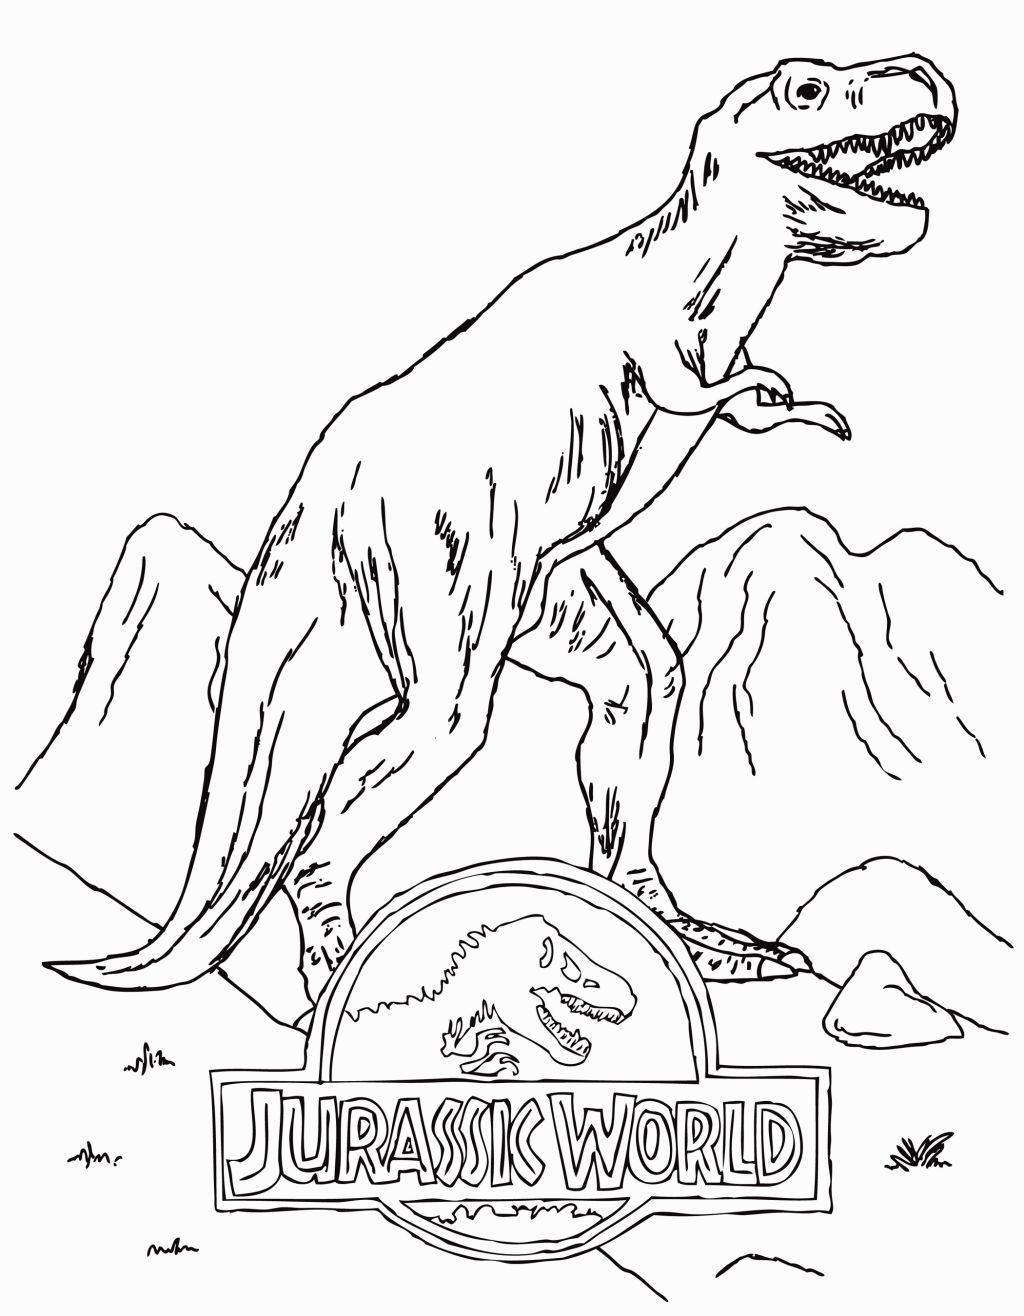 Jurassic World Free Printable Coloring Pages